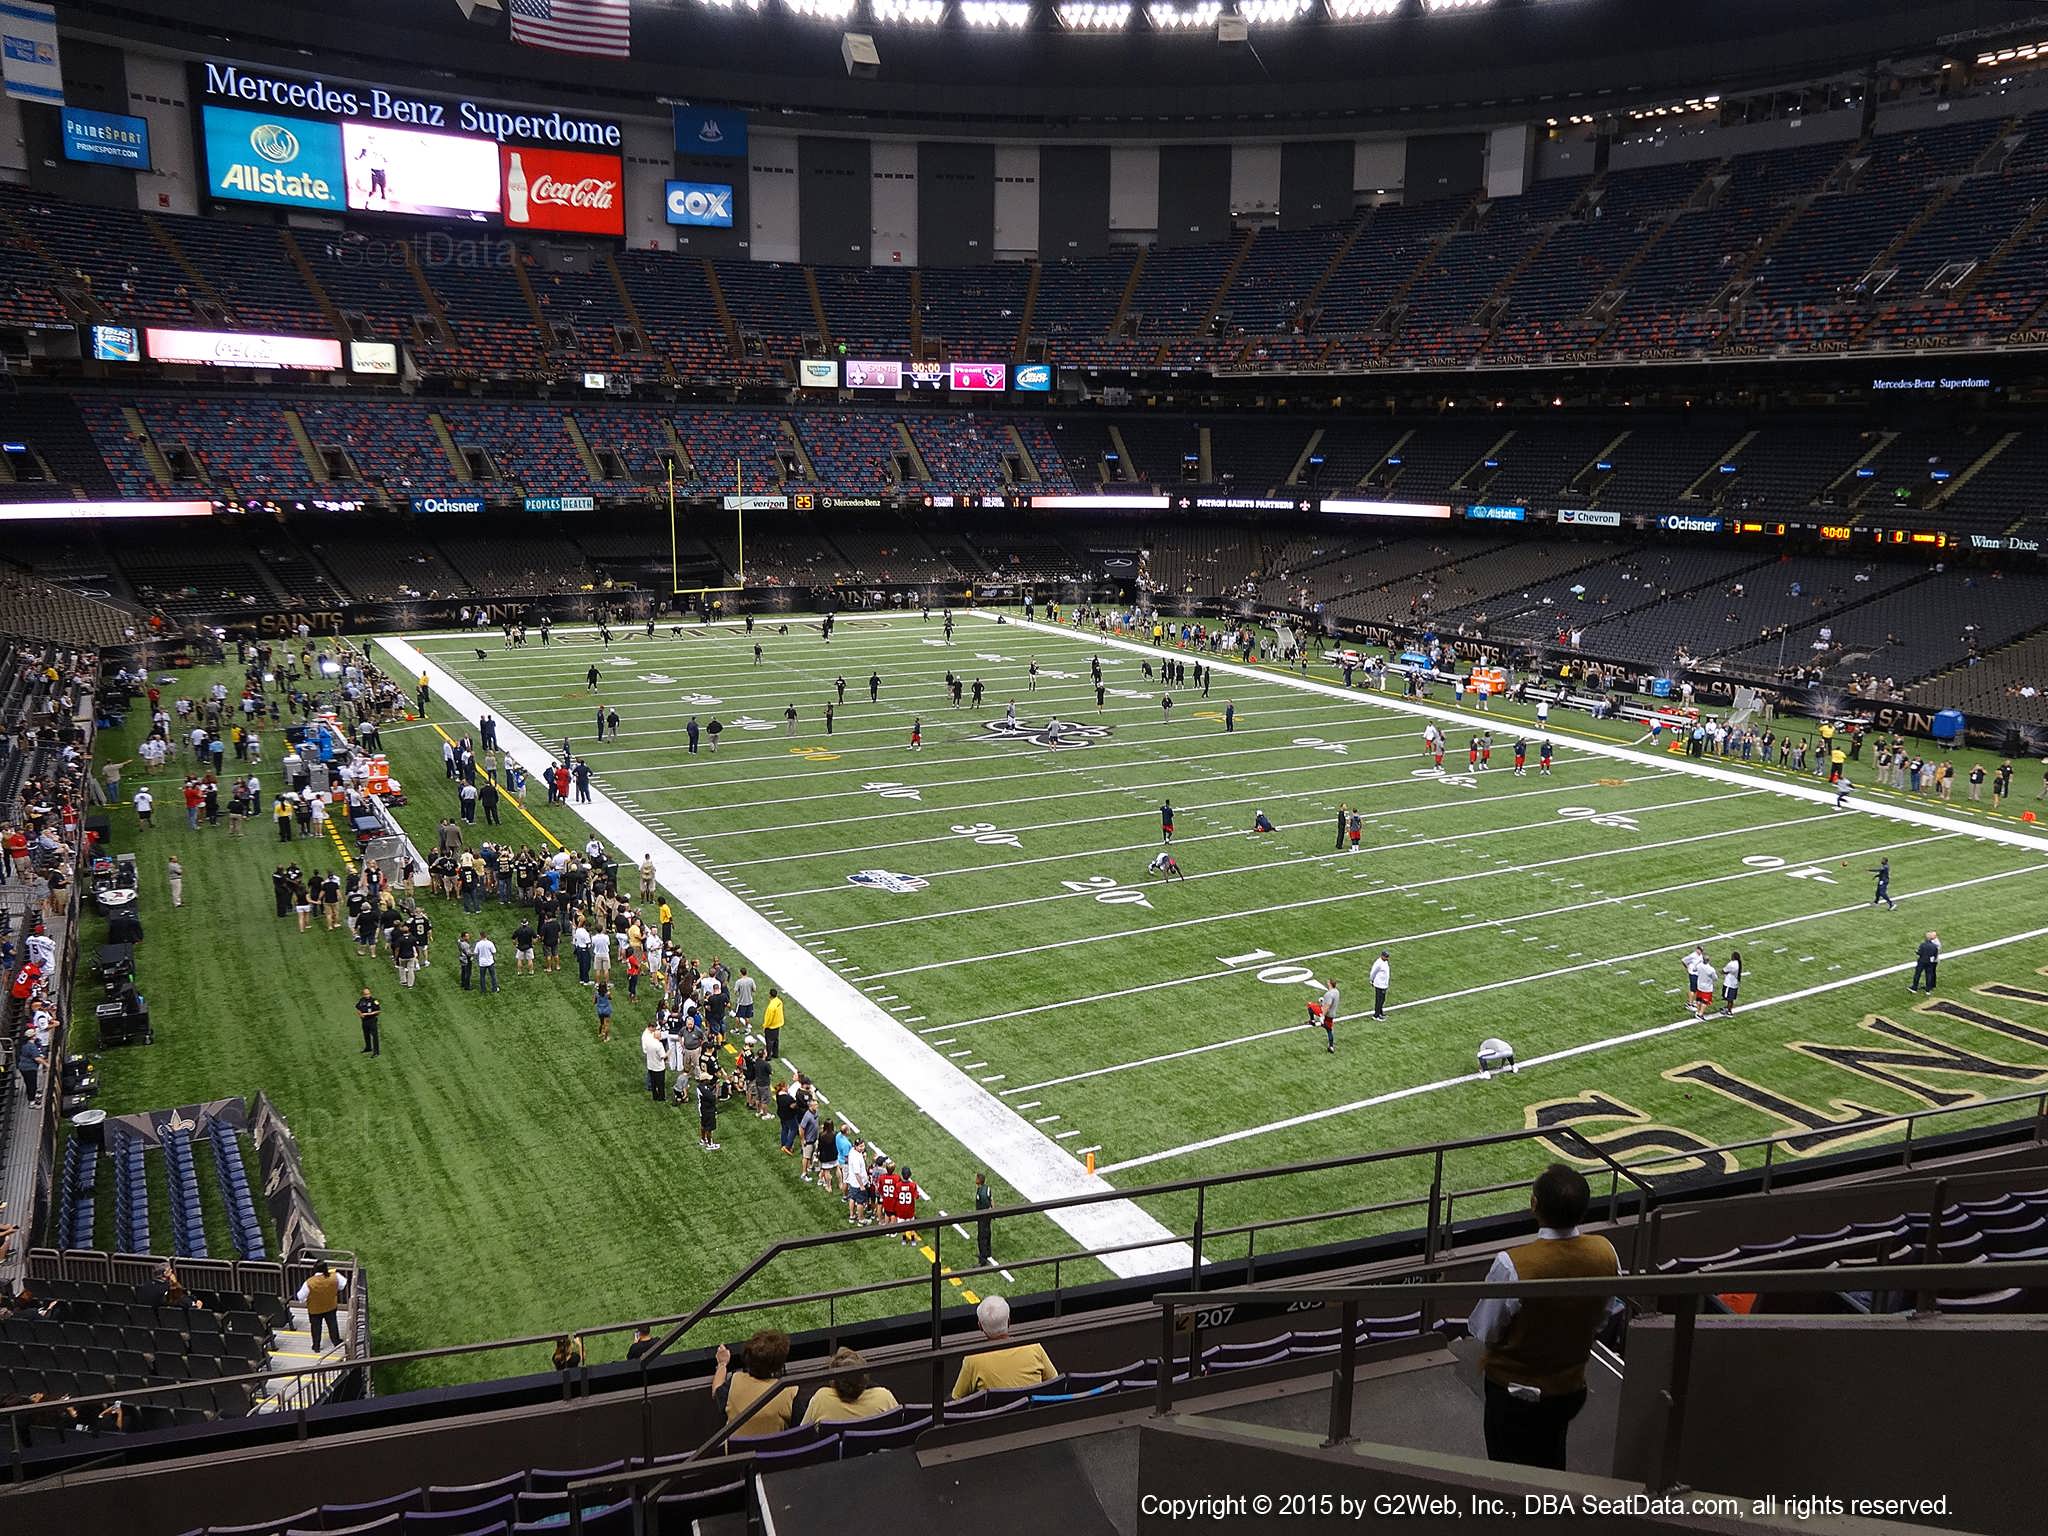 Seat view from section 304 at the Mercedes-Benz Superdome, home of the New Orleans Saints